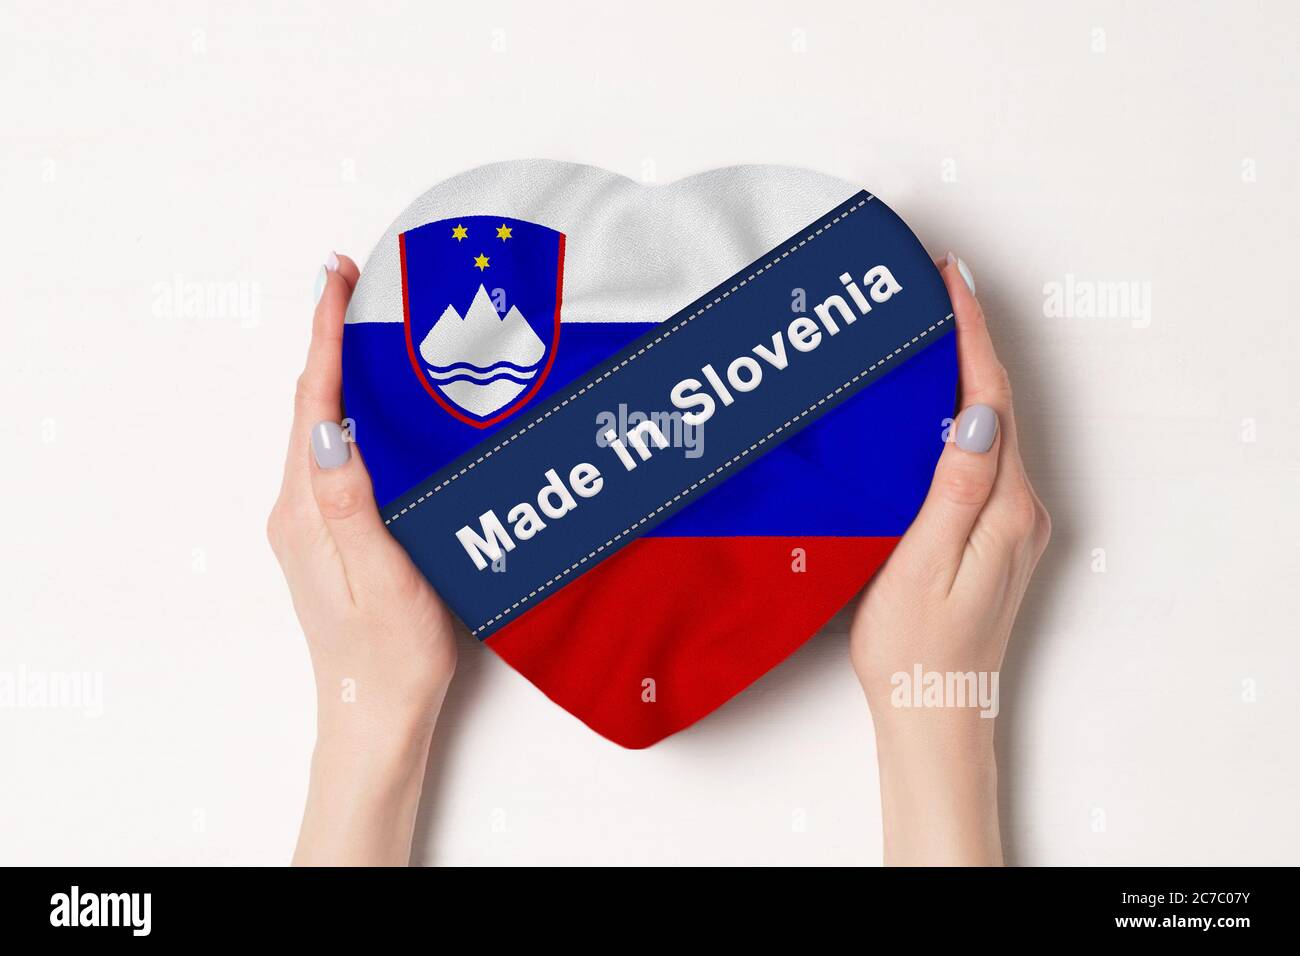 Inscription Made in Slovenia the flag of Slovenia. Female hands holding a heart shaped box. White background. Stock Photo